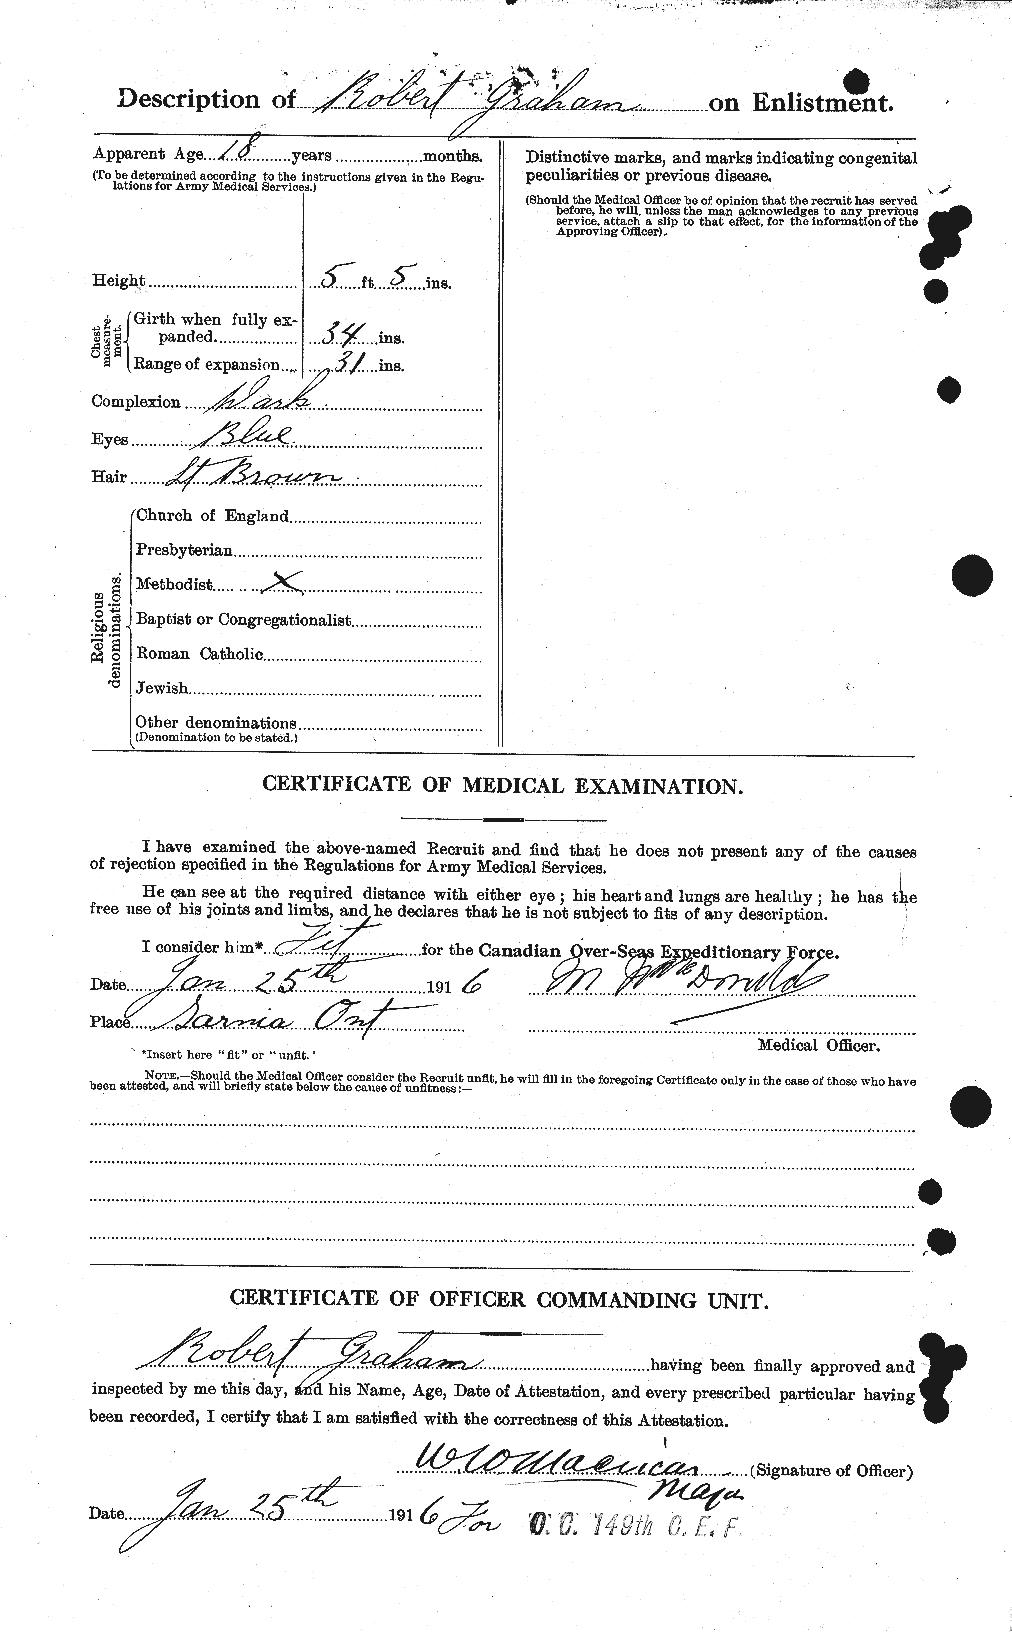 Personnel Records of the First World War - CEF 359386b